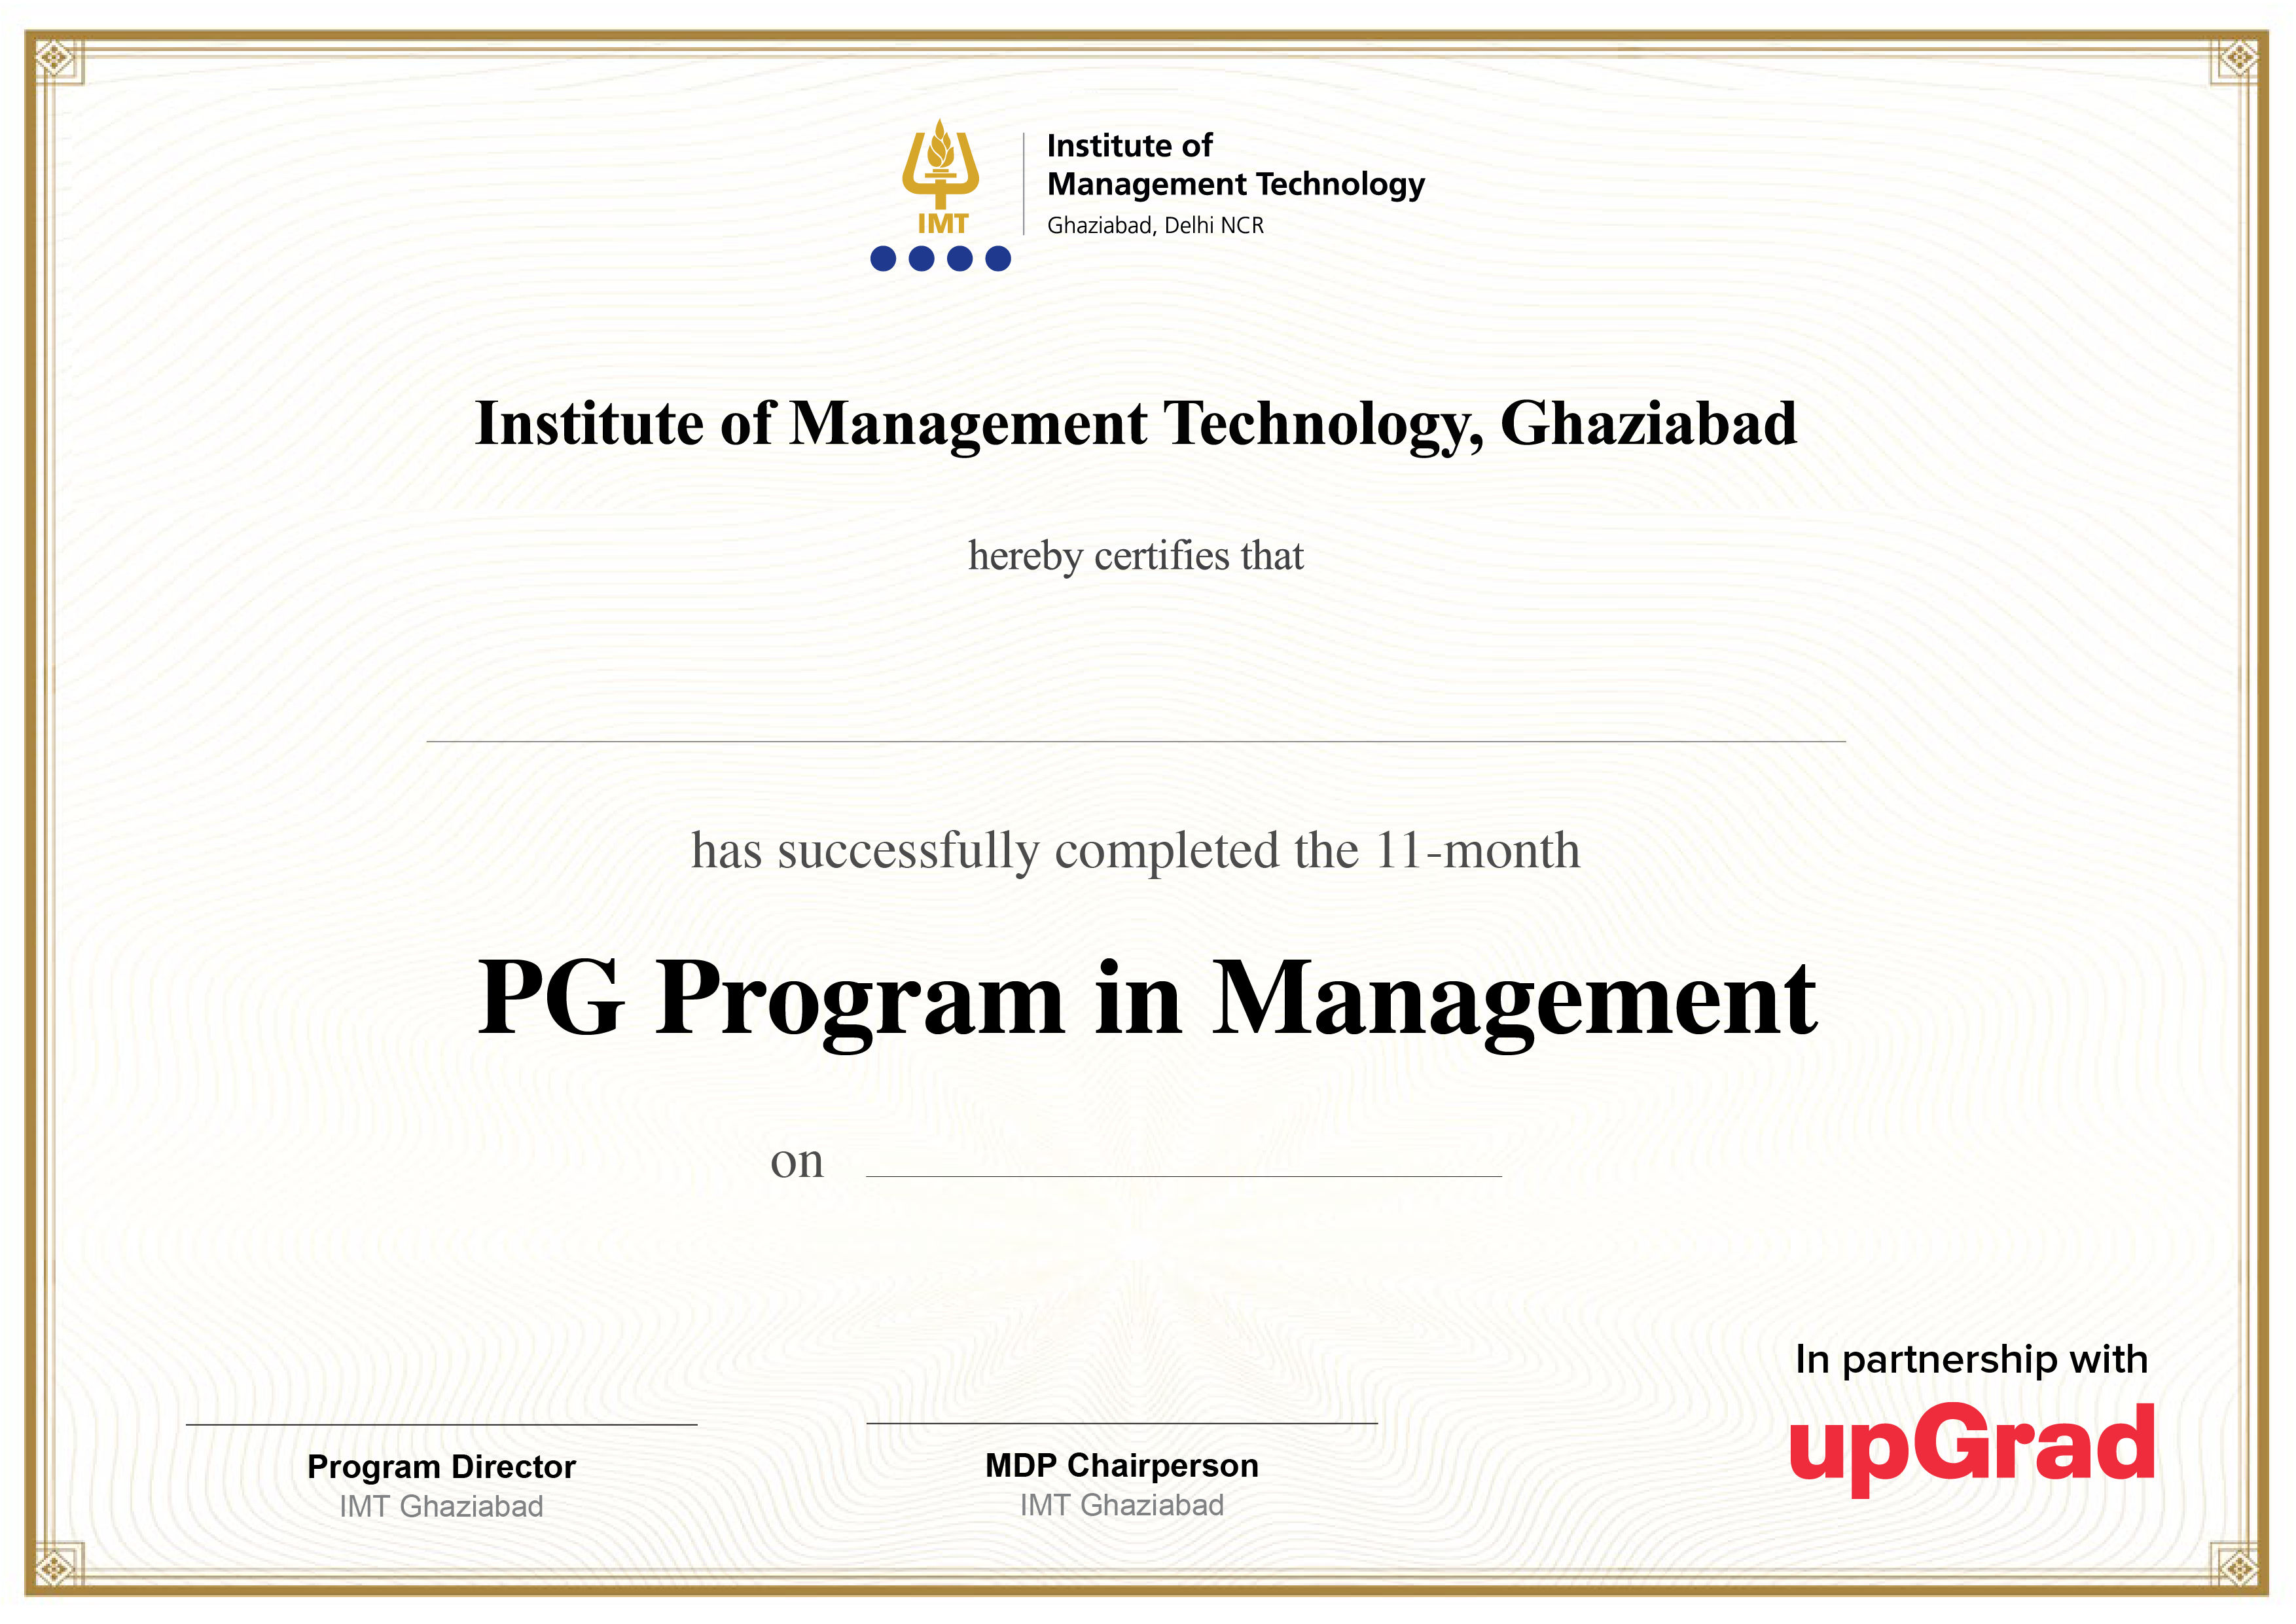 PG Programme in Management from IMT Ghaziabad